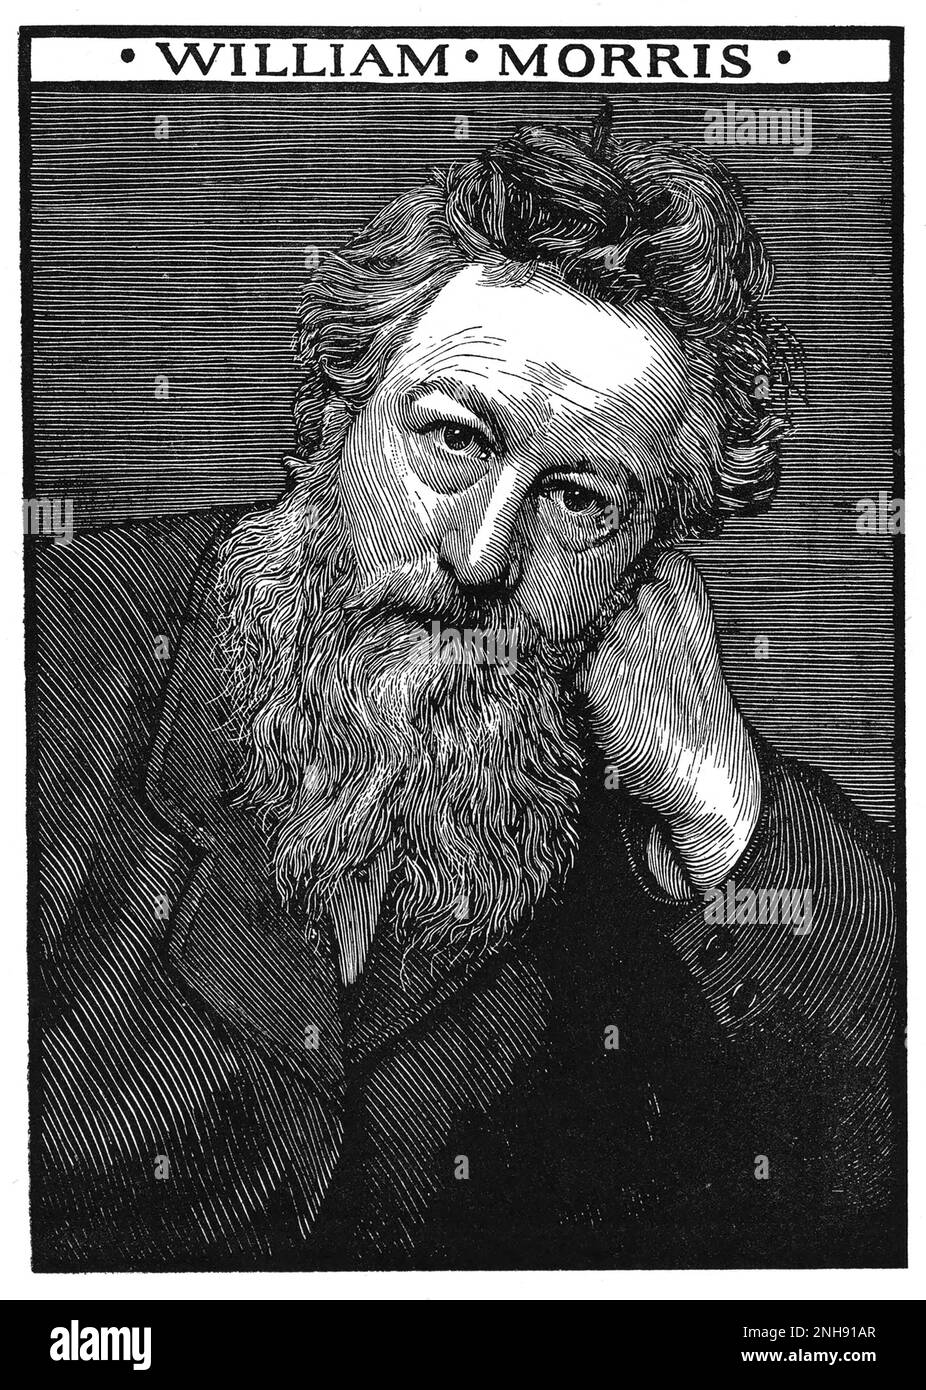 William Morris (1834-1896) was an English textile designer, poet, artist, novelist, architectural conservationist, printer, translator and socialist activist associated with the British Arts and Crafts Movement. Woodcut by Robert Bryden (1865-1939), a Scots artist and sculptor, 1901. Stock Photo